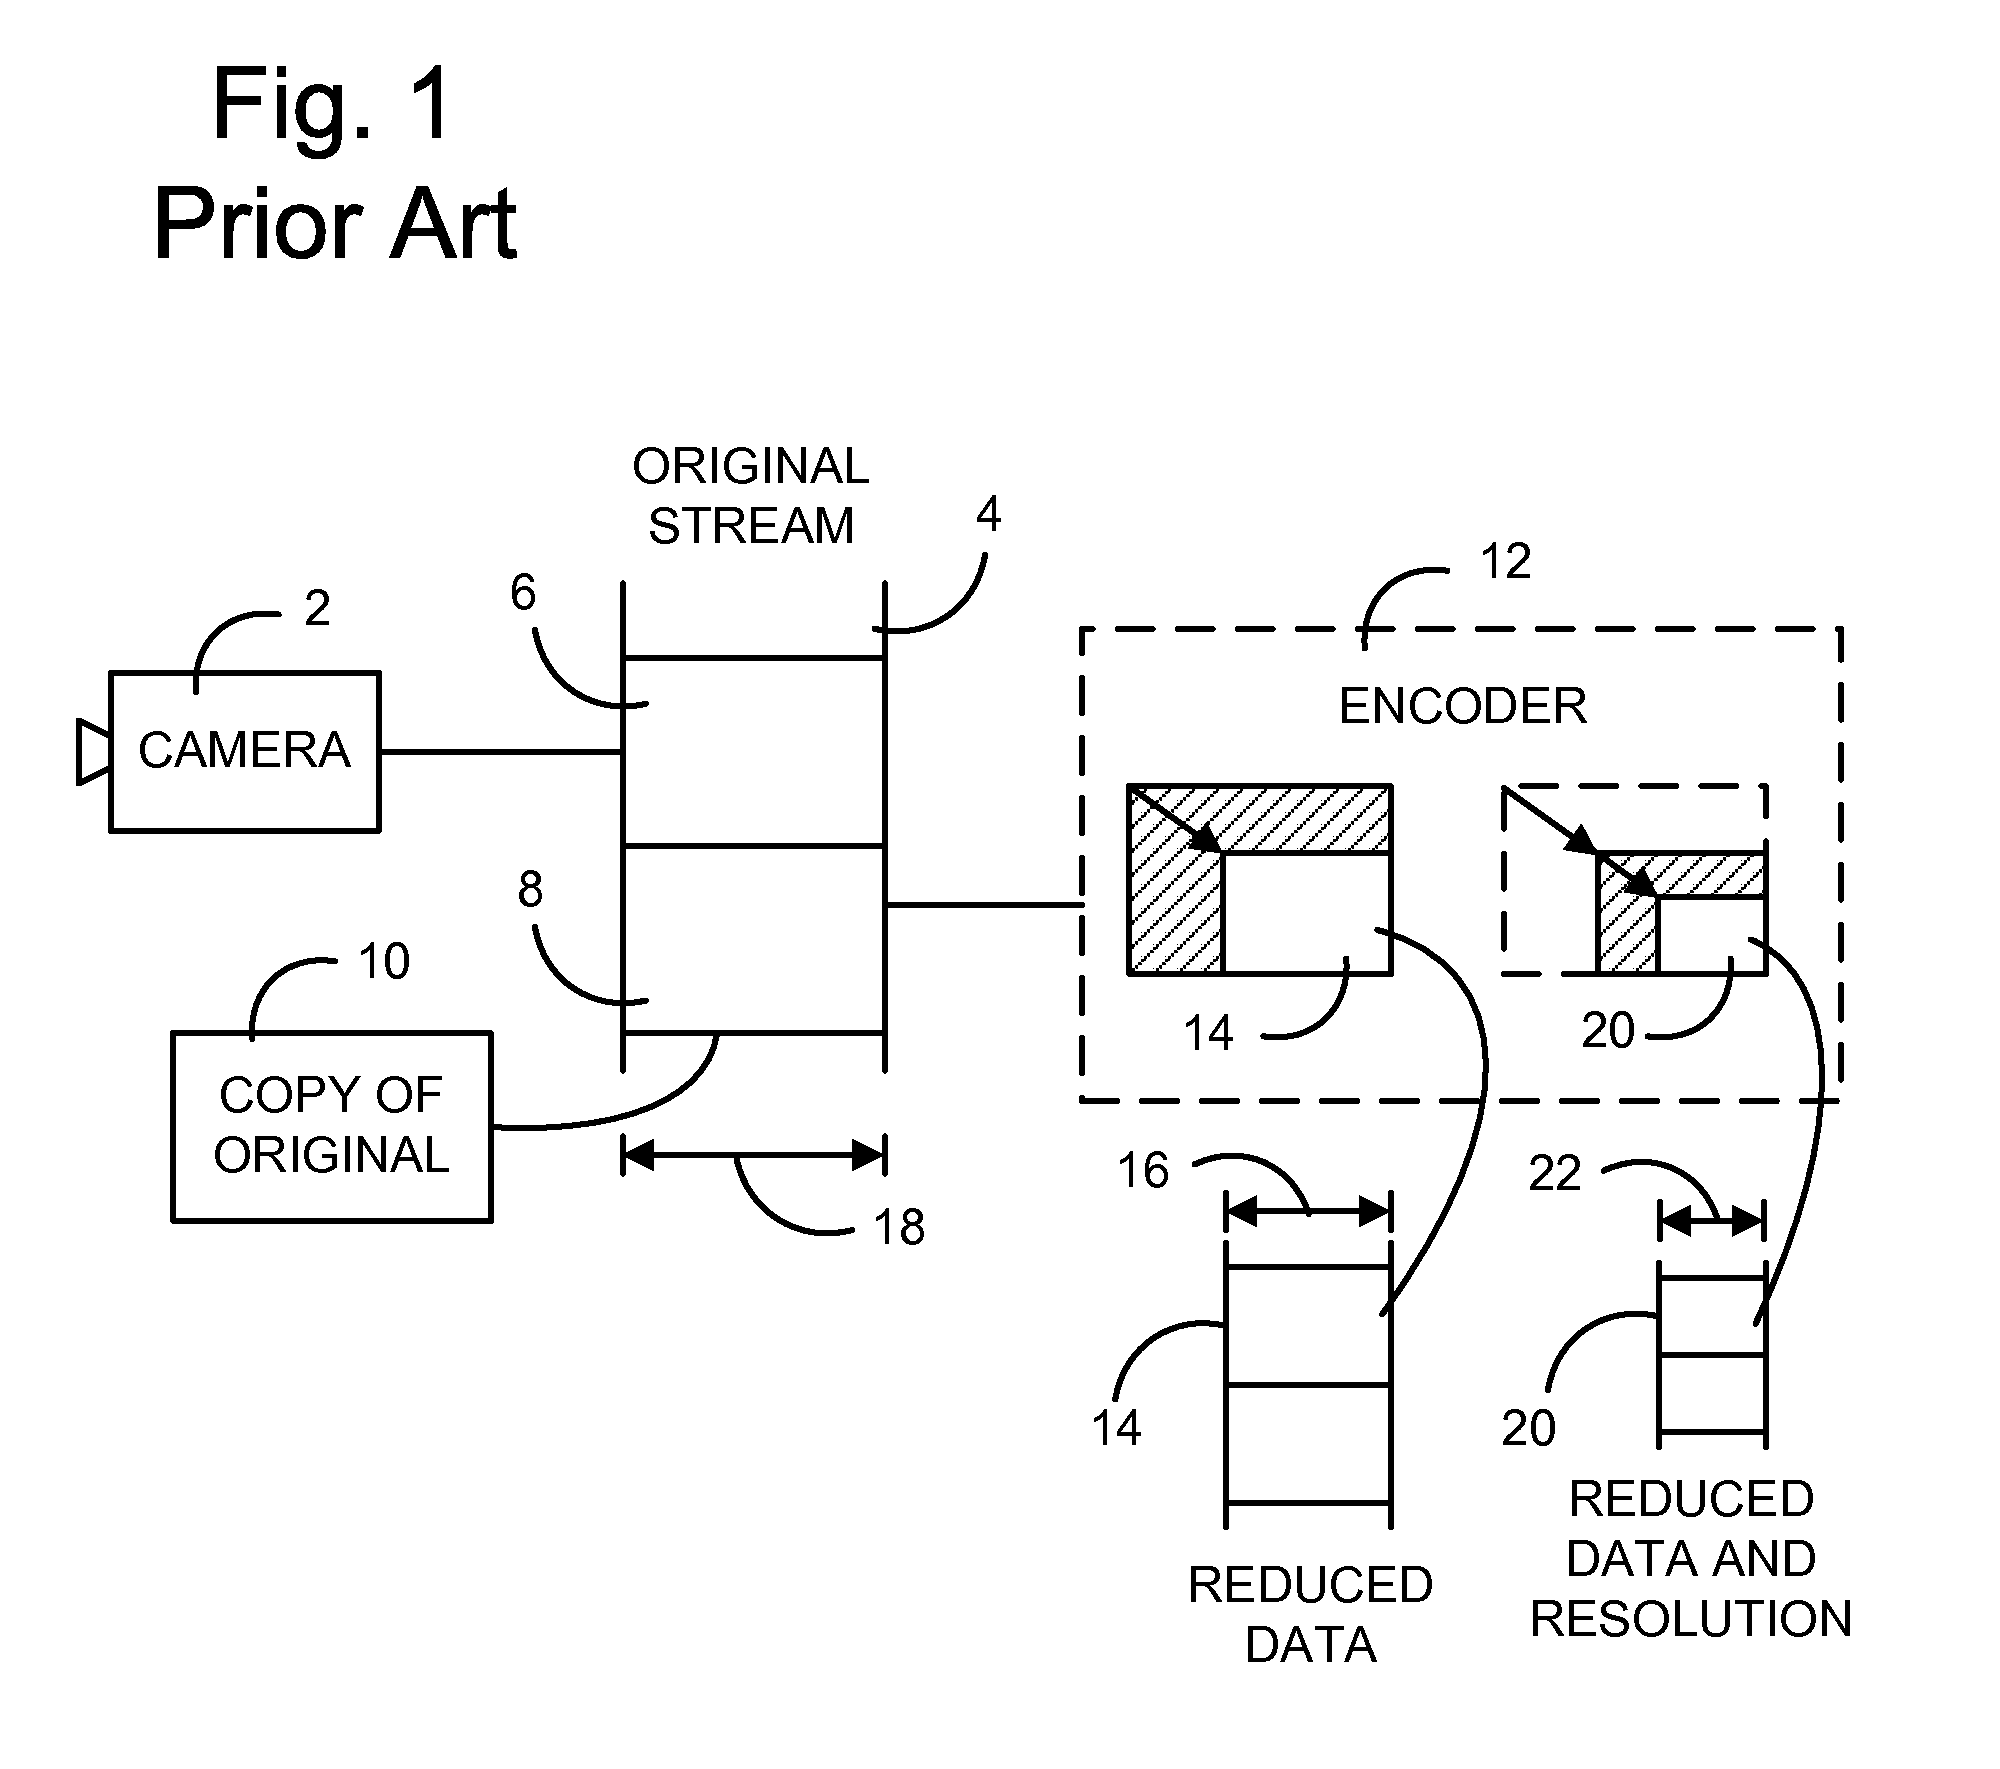 Image Delivery System with Image Quality Varying with Frame Rate